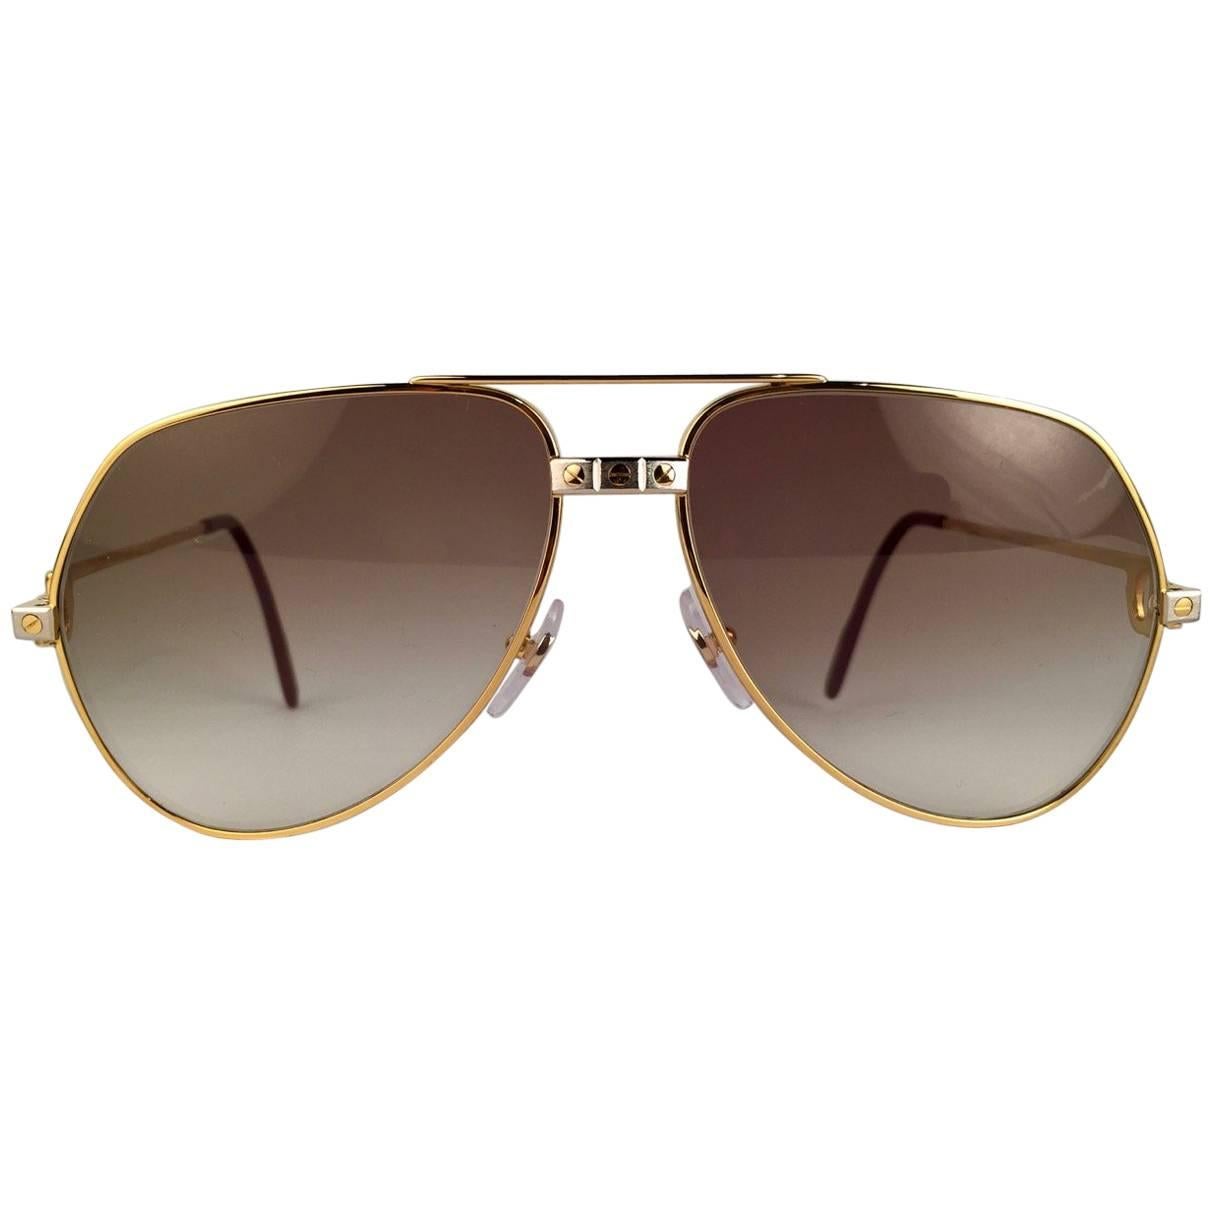 Cartier Aviator Santos Sunglasses with Brown Gradient (uv protection) Lenses.  Frame is with the famous screws on the front and sides in yellow and white gold. All hallmarks. Red enamel with Cartier gold signs on the ear paddles.  Both arms sport